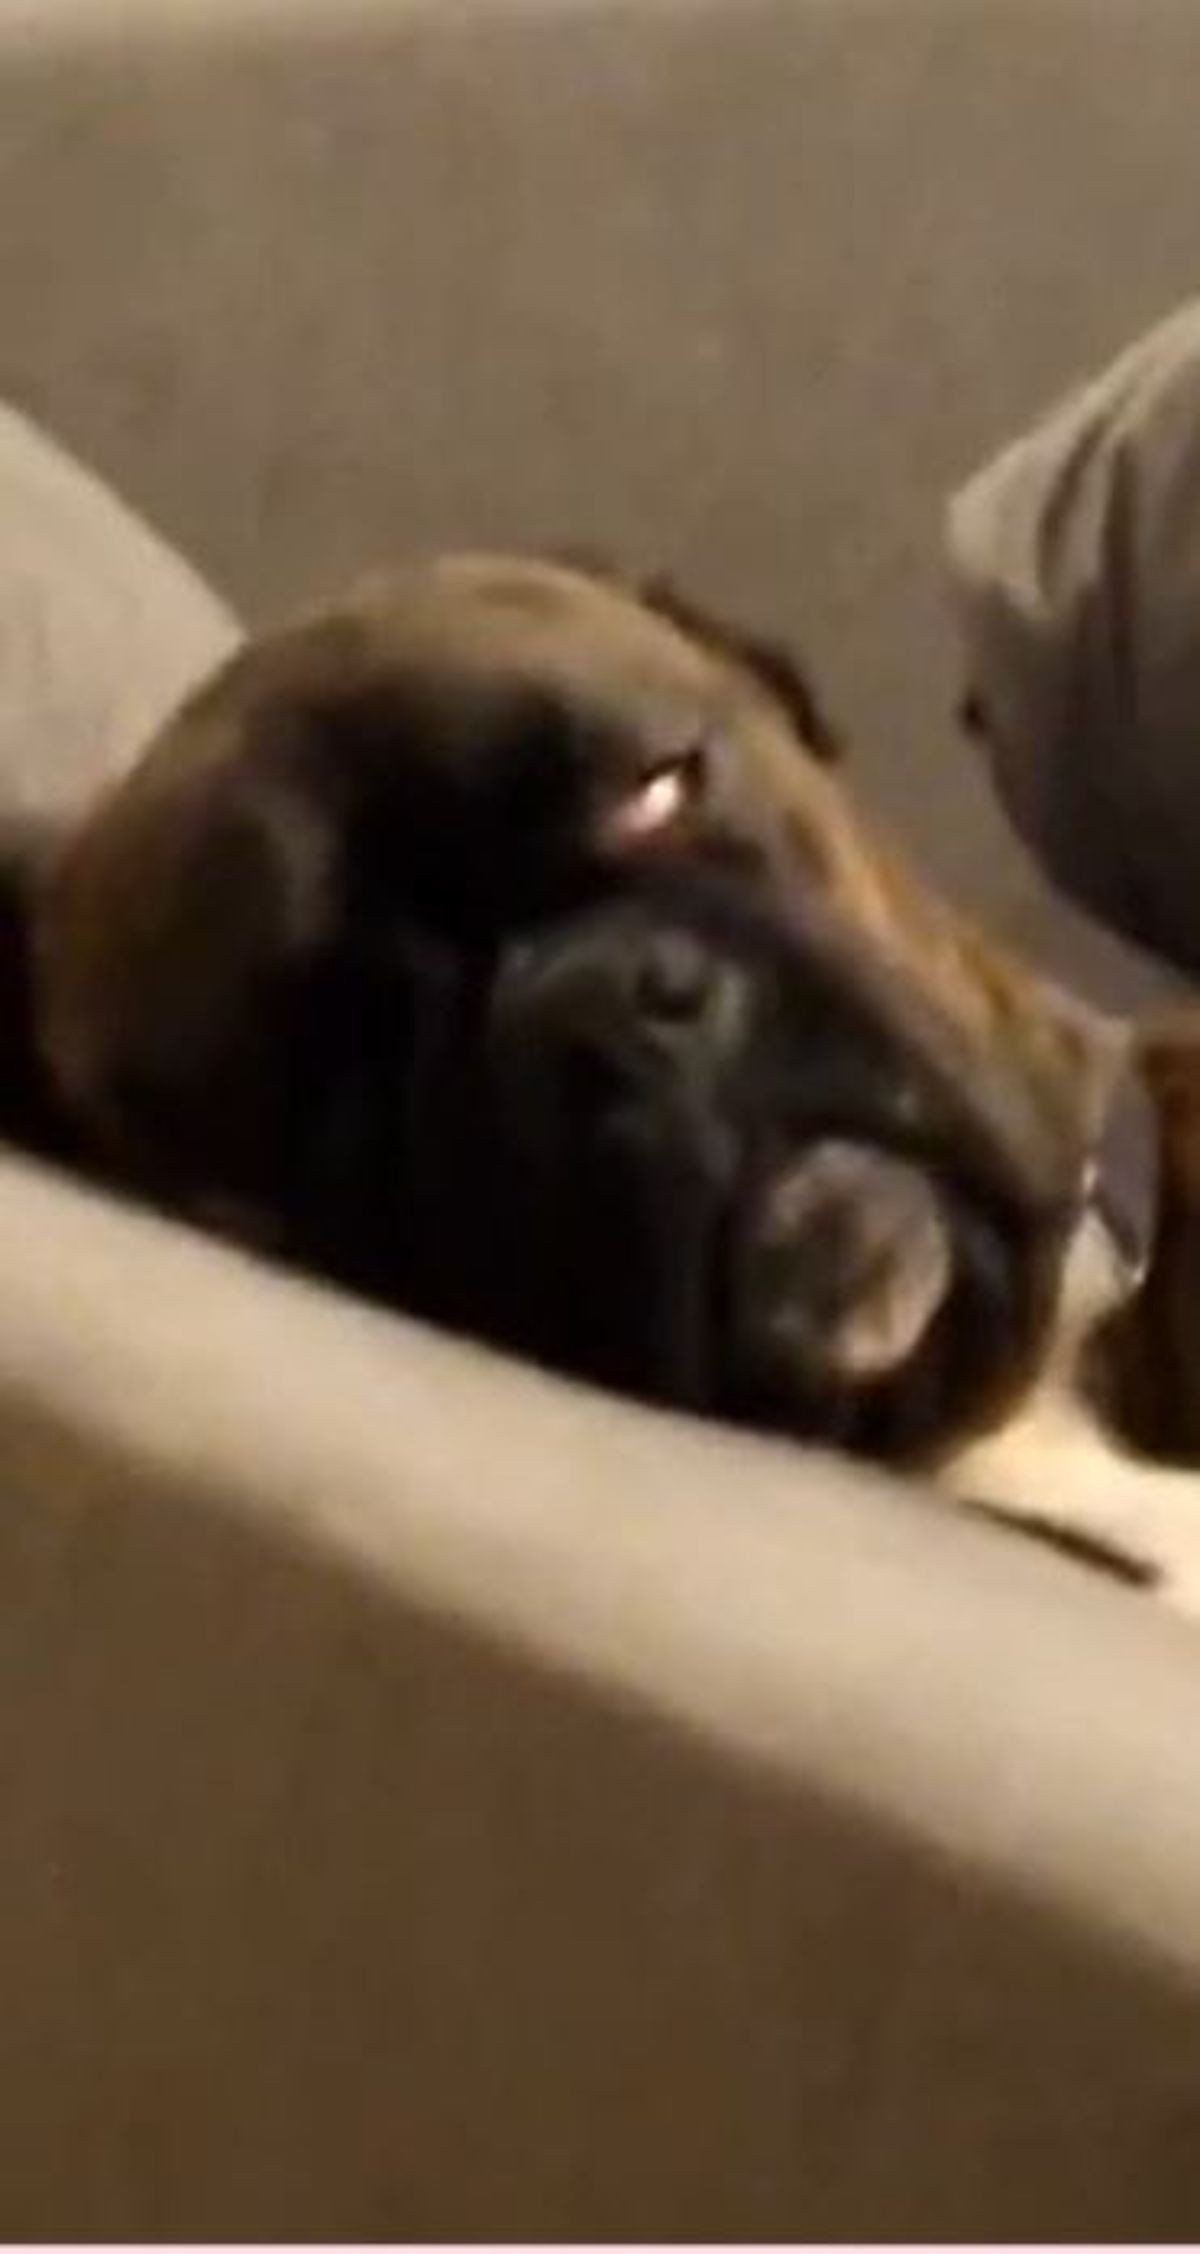 black and brown boxer sleeping on a sofa with one eye slightly open in deep sleep